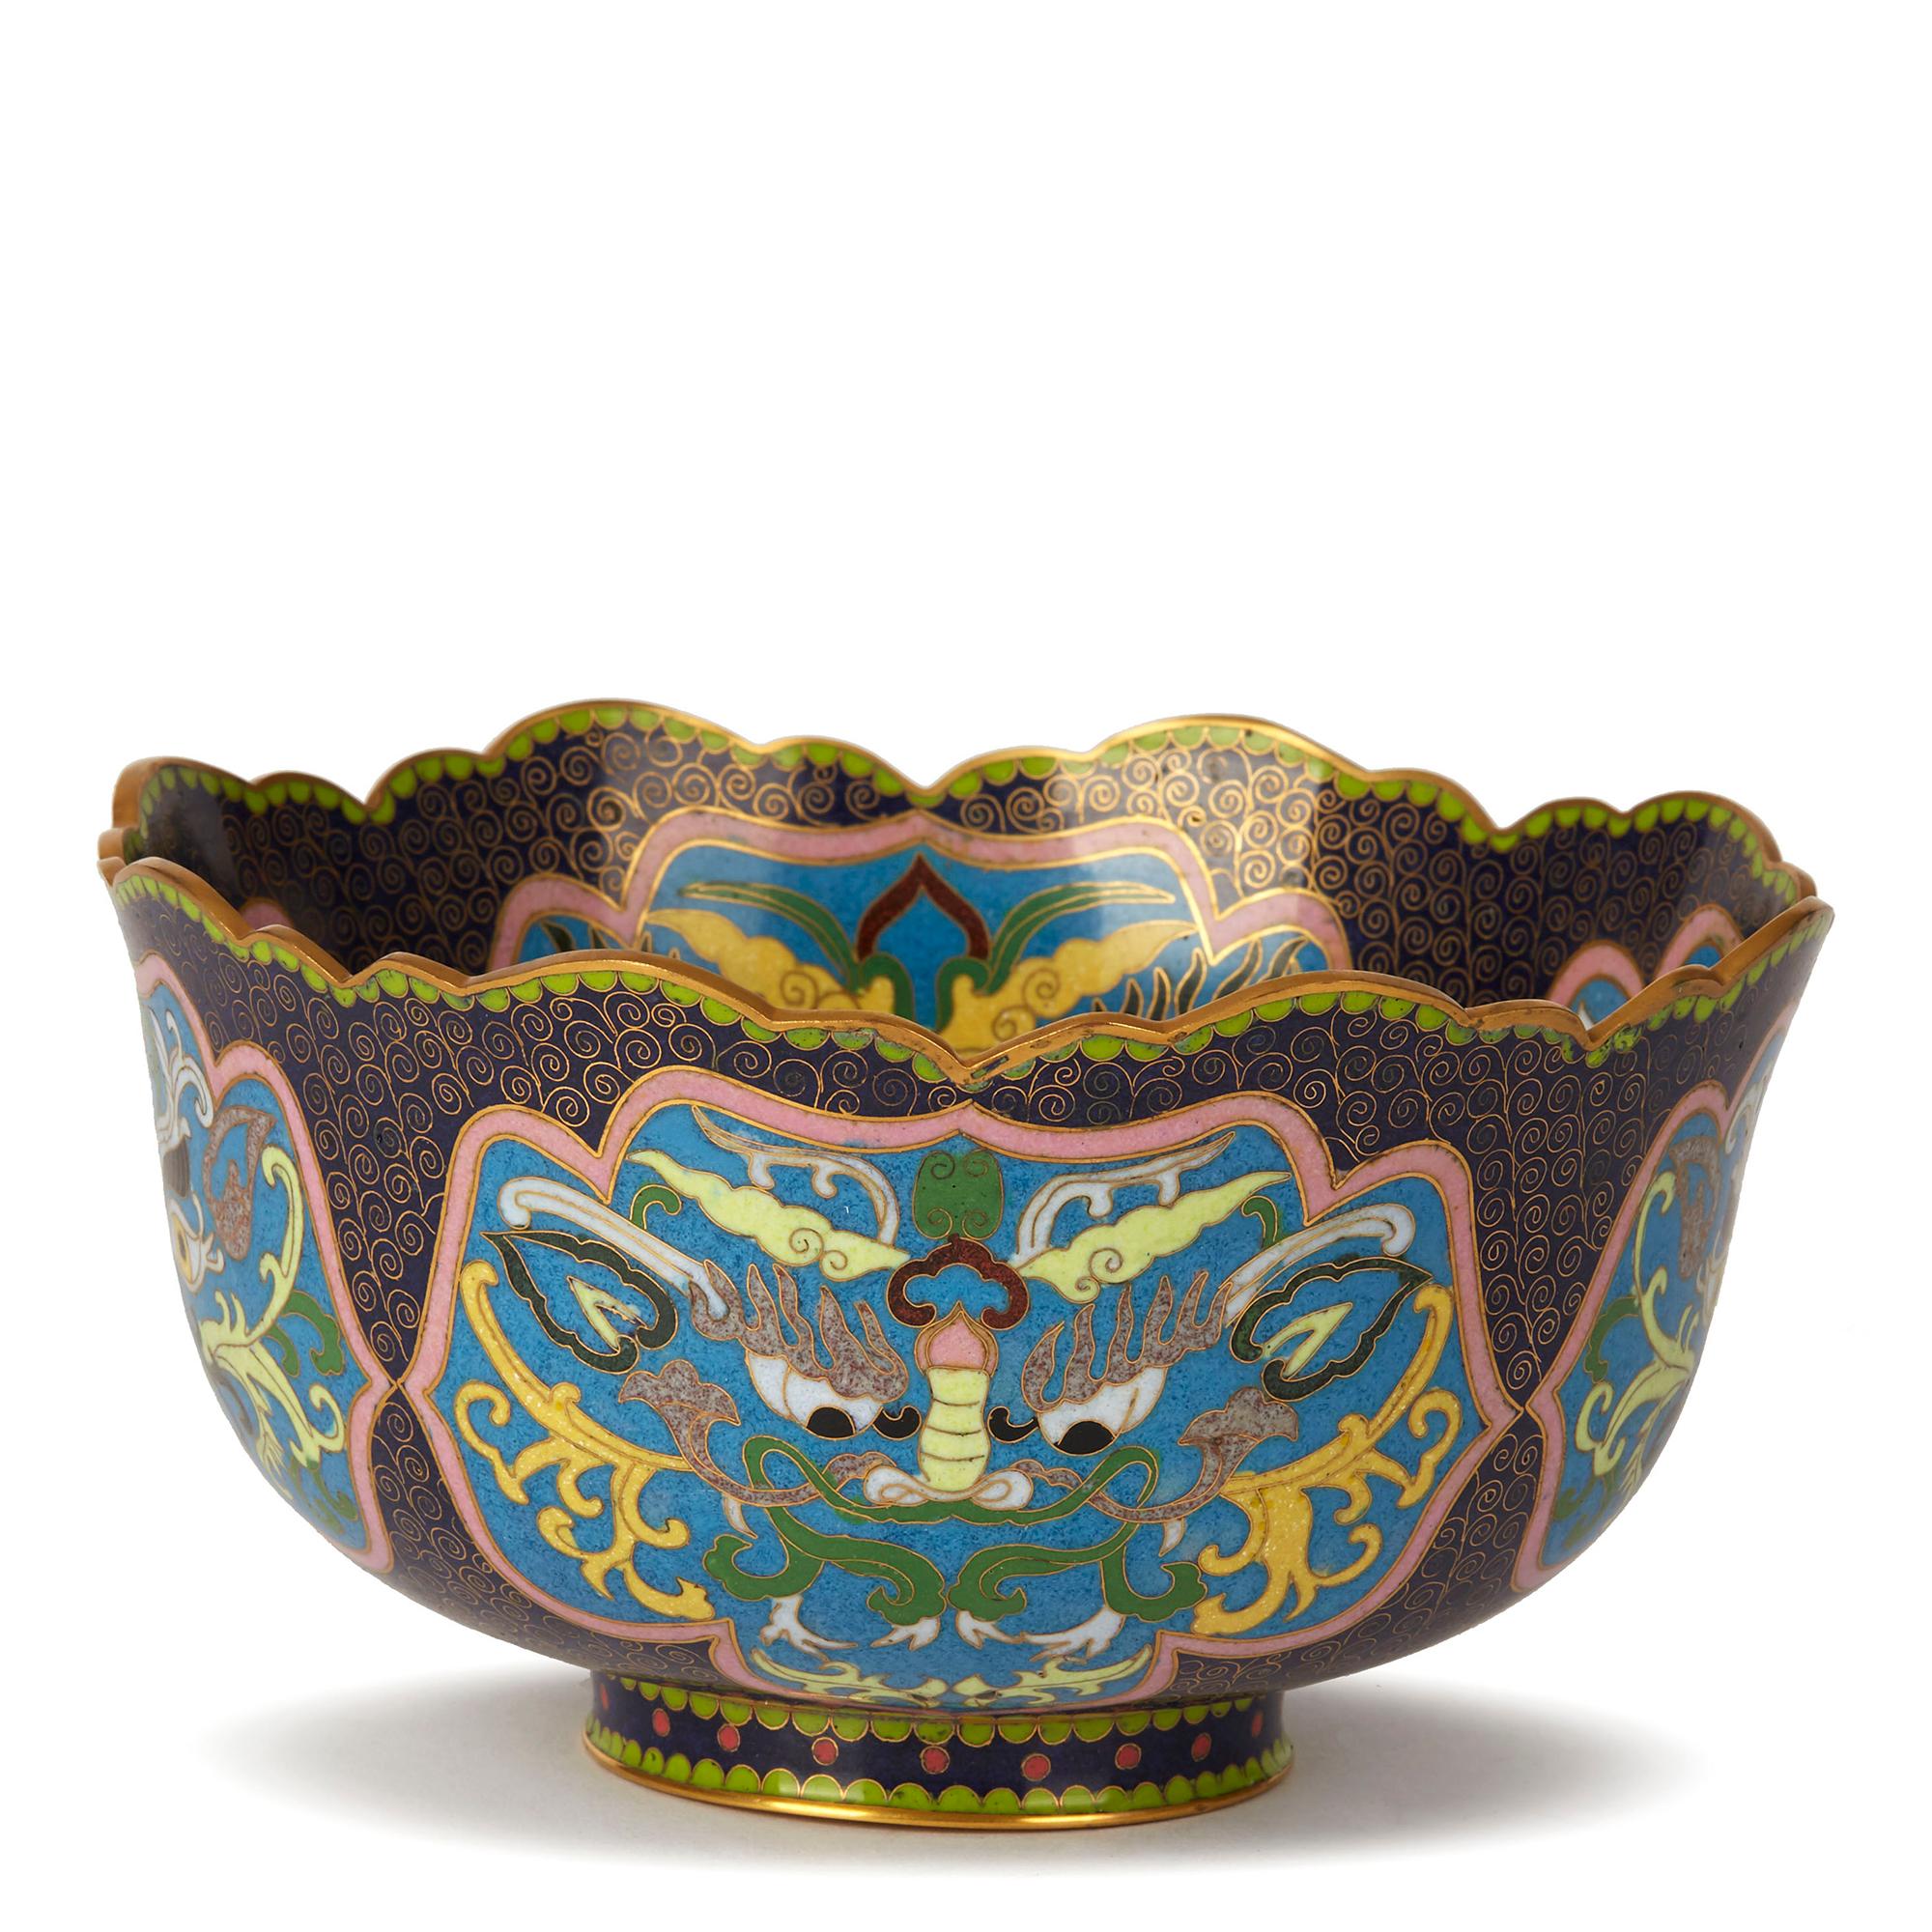 An exceptional and finely decorated vintage Chinese Republic period cloisonné bowl decorated with panels containing grotesque masks. The rounded and heavily made bowl stands on a narrow rounded foot with a shaped rim with a gilded finish to the edge